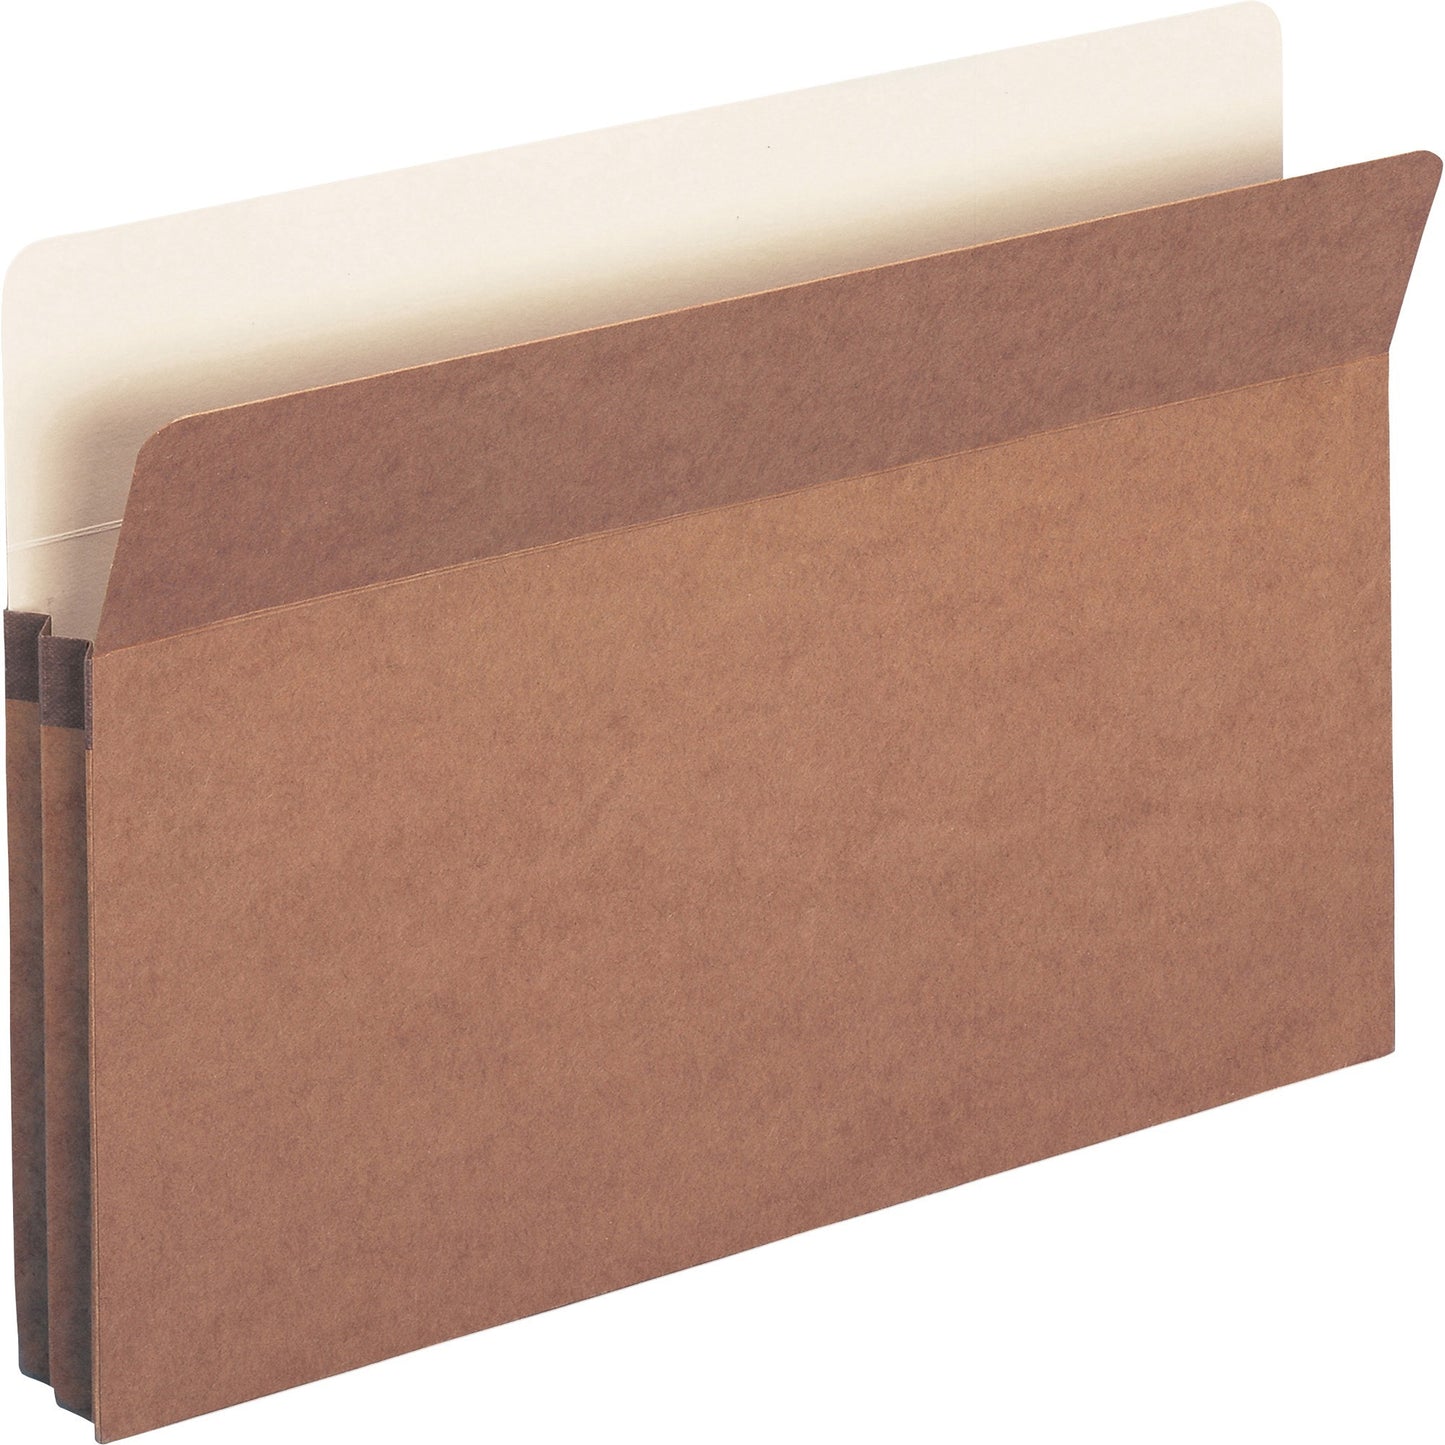 Business Source Straight Tab Cut Legal Recycled File Pocket